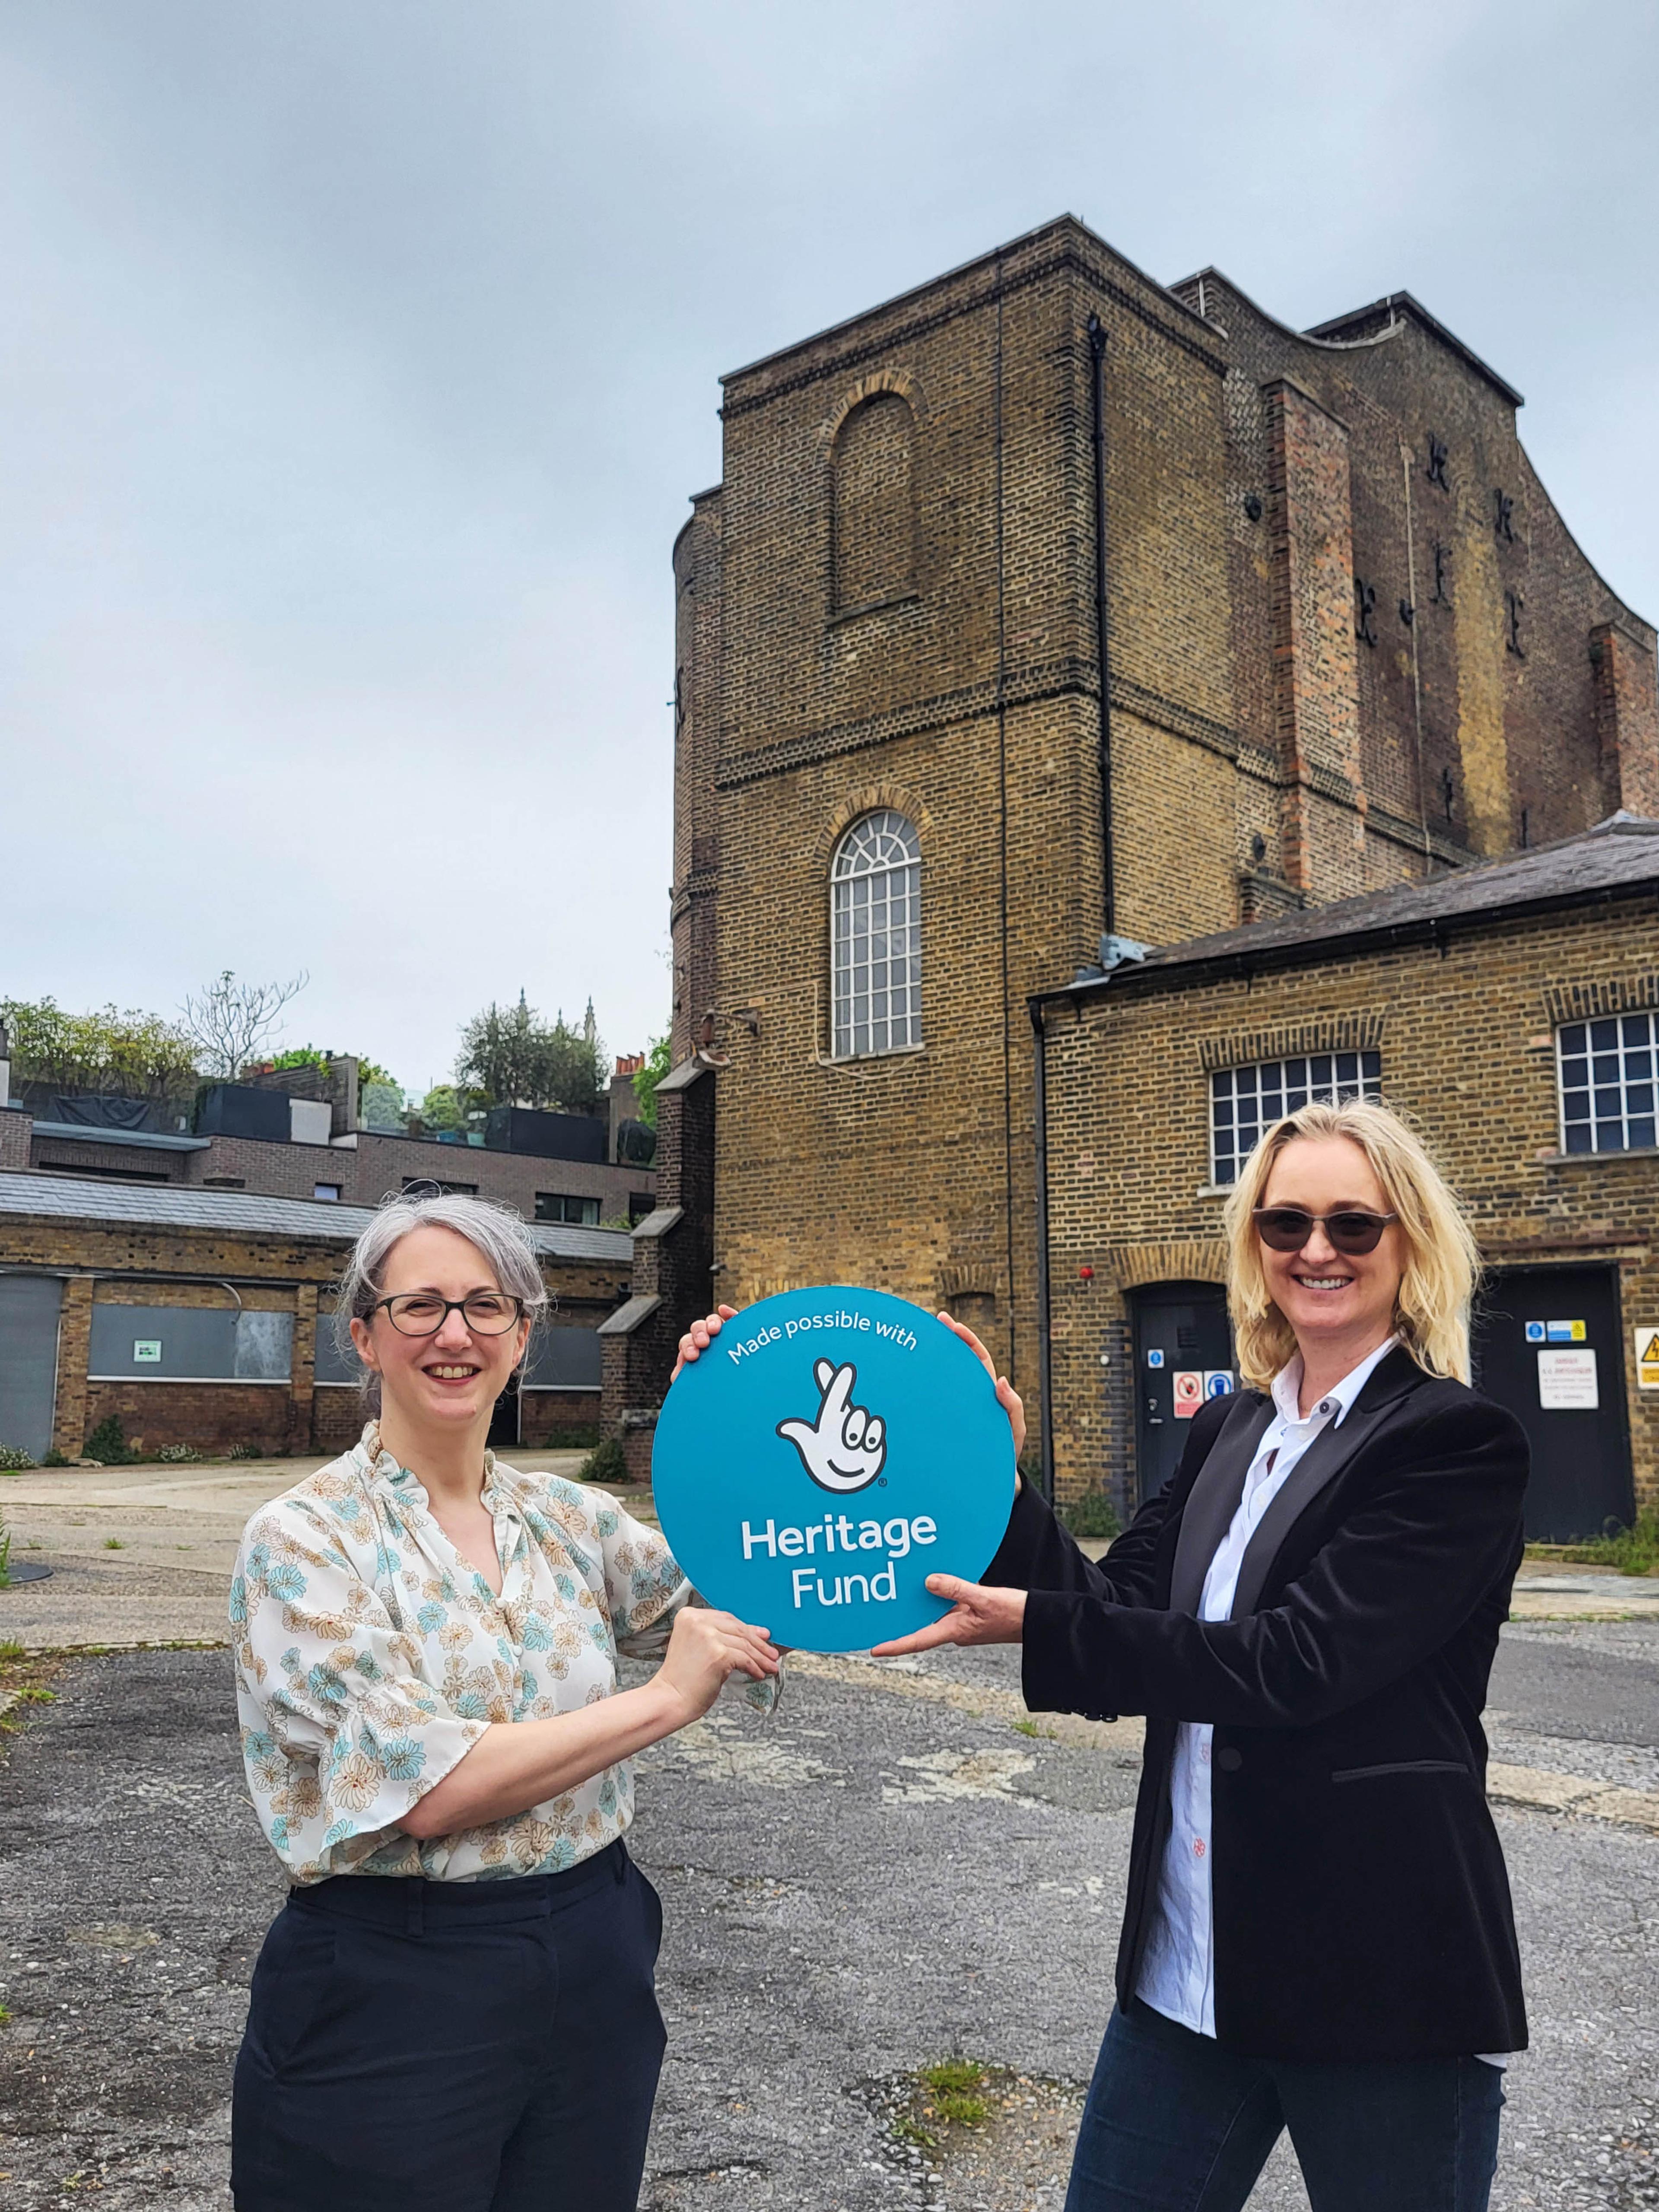 Photograph of two people standing and holding a sign between them with The National Lottery Heritage Fund logo on a teal background, behind them is a brick building.